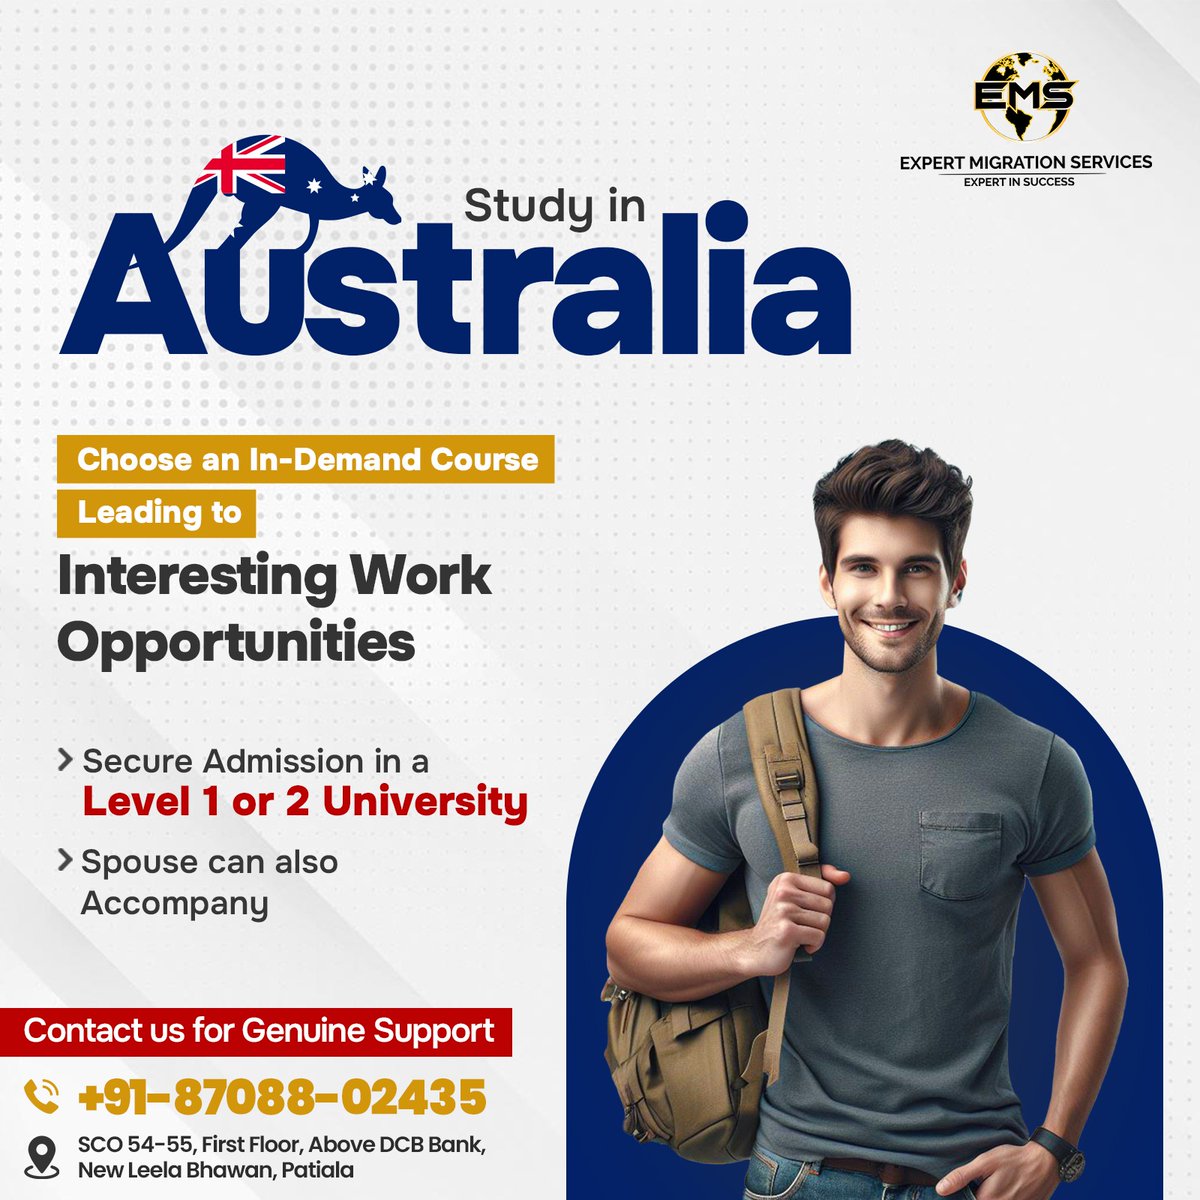 Ready to advance your career in Australia? Choose an in-demand course that leads to exciting work opportunities! Secure your spot at a top-tier Level 1 or 2 university, and bring your spouse along for the journey. 
.
.
#ExpertMigrationServices #StudyinAustralia #SettleInAustralia